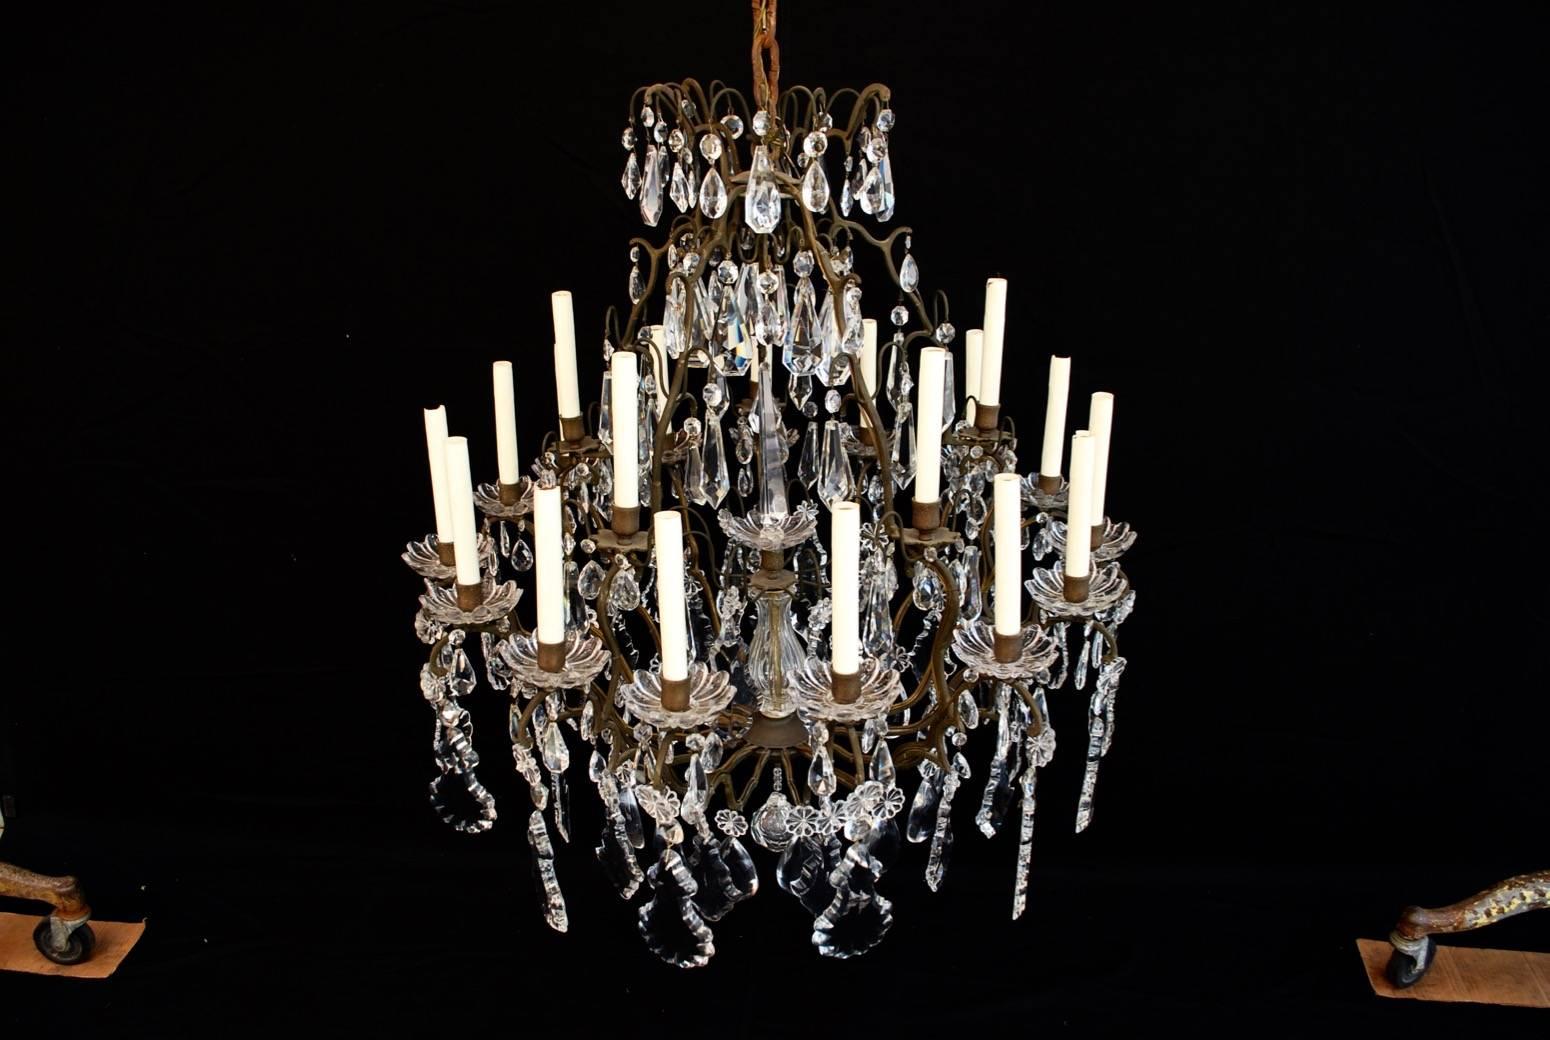 We have over 3000 antique sconces and over 1000 antique lights, if you need a specific pair of sconces or lights use the 